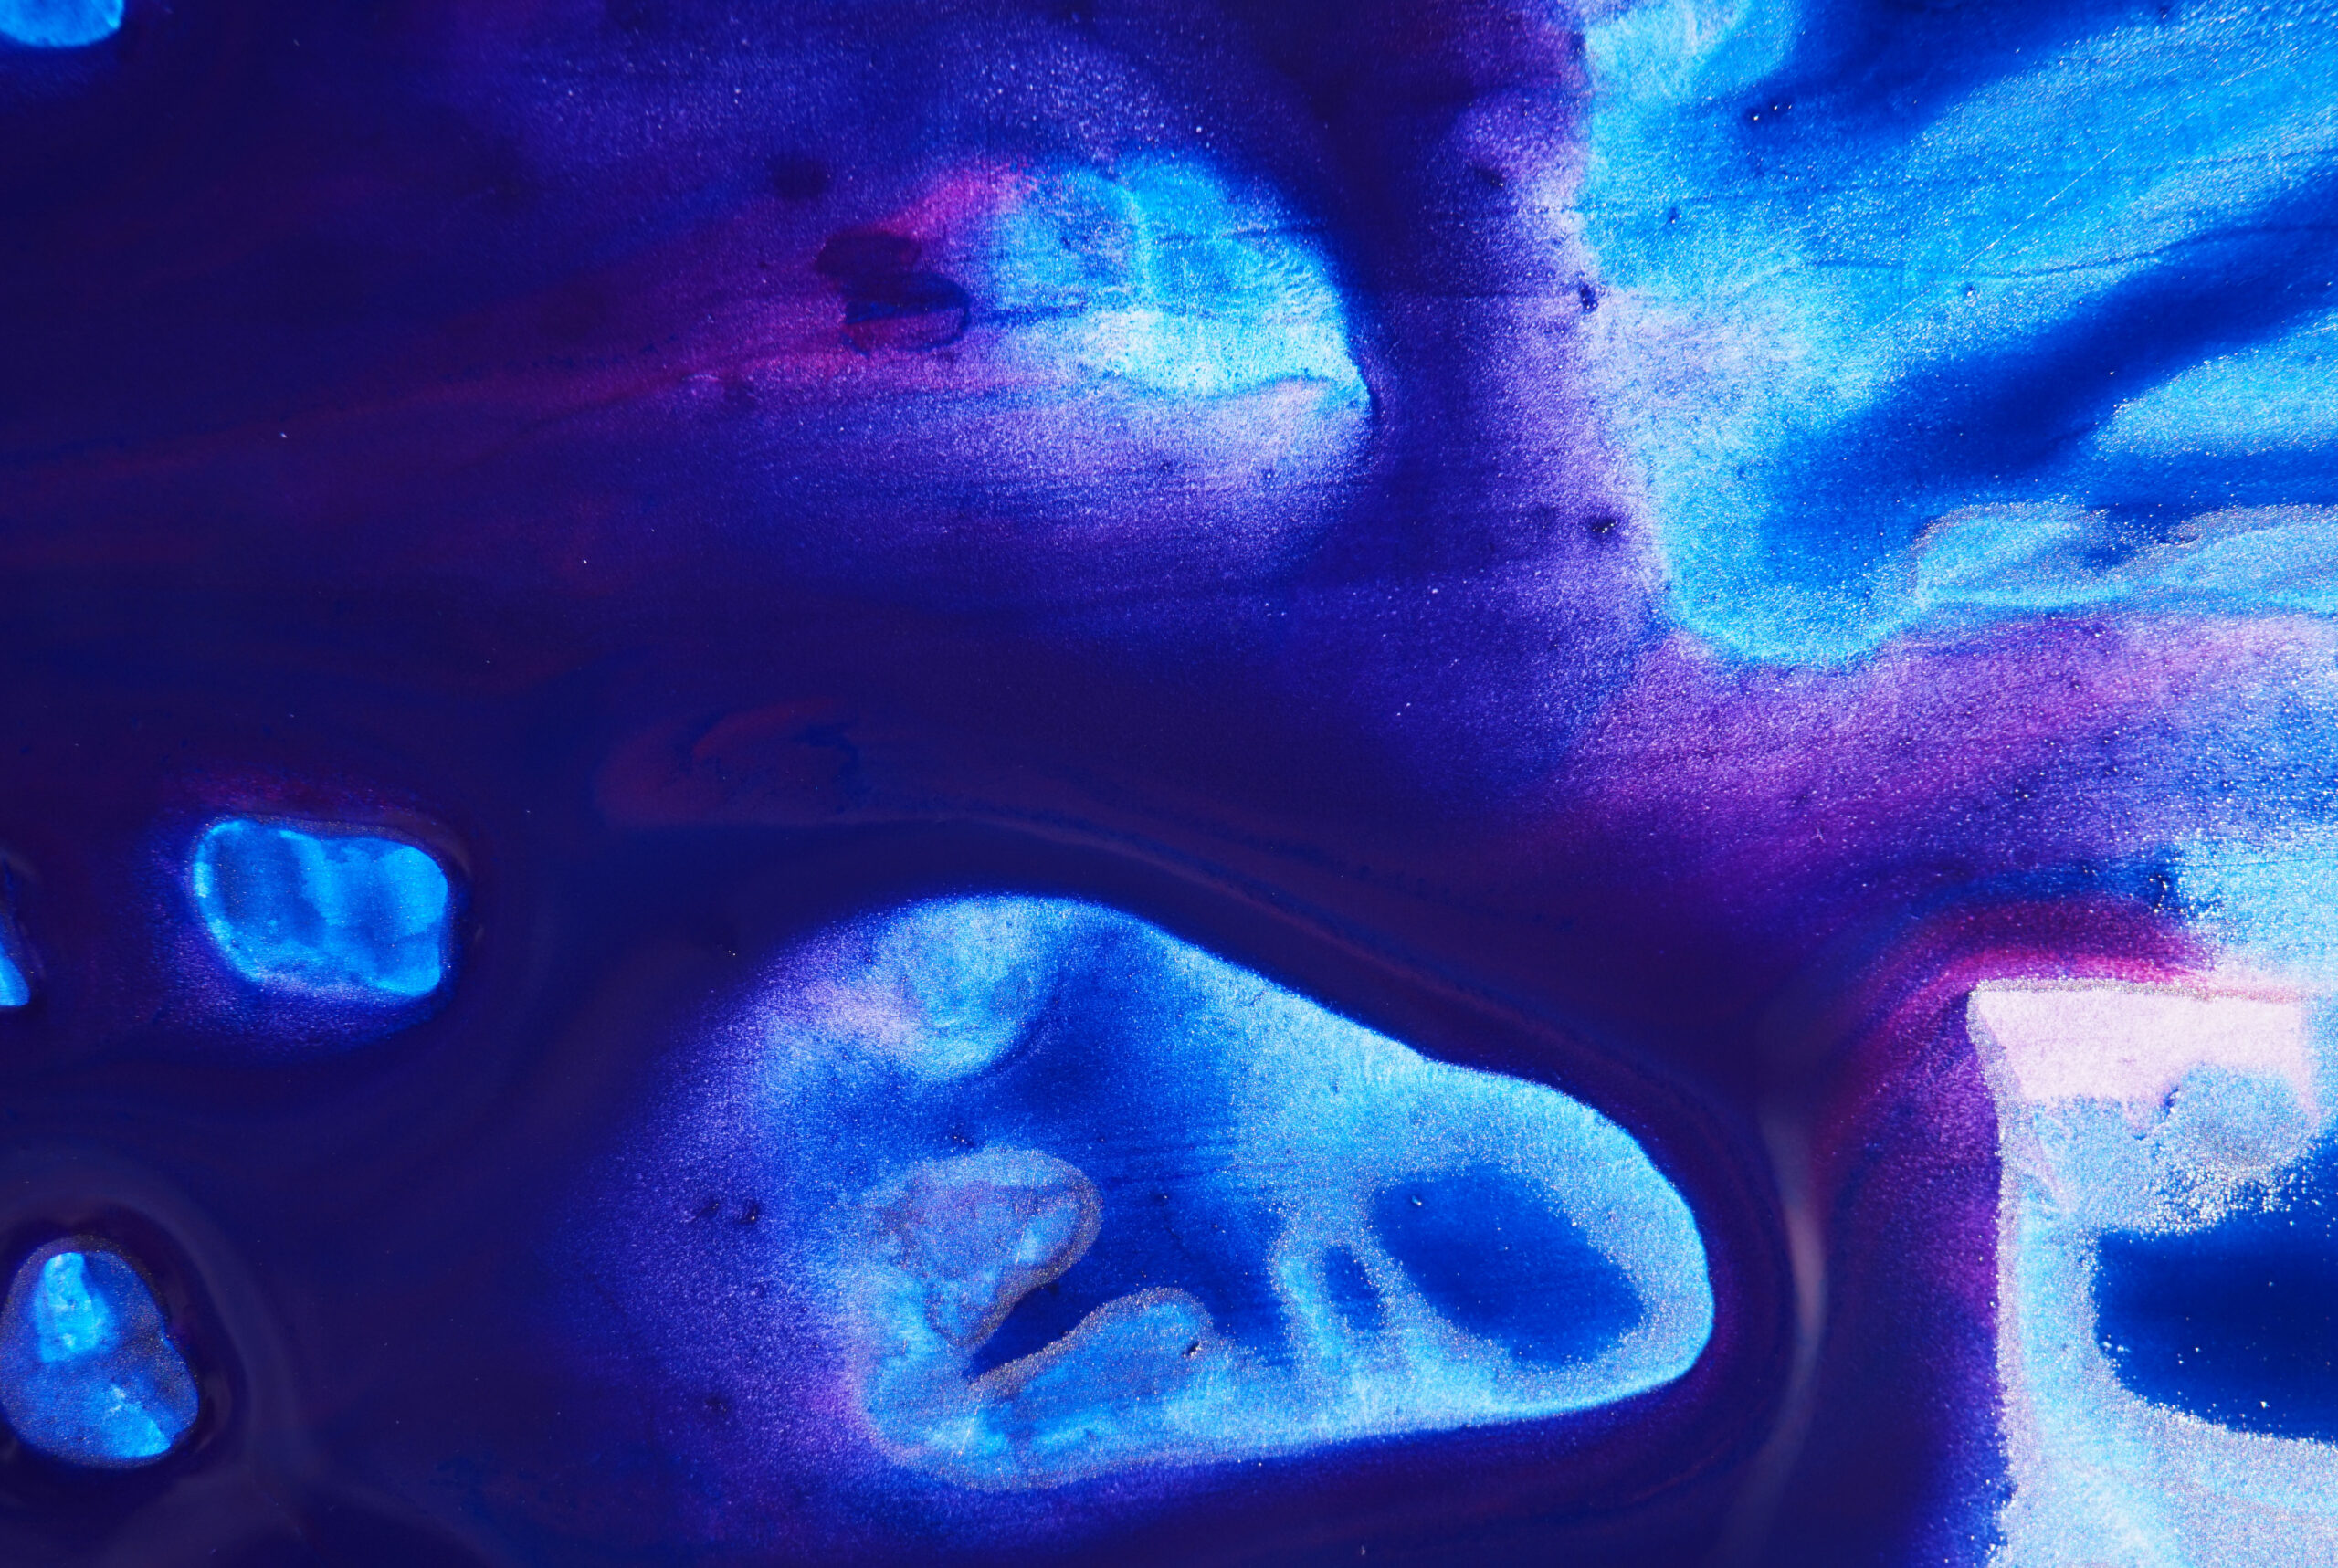 blue and purple layered, watery calligraphy drawn with acrylic paint and ink on gator board, extreme close-up